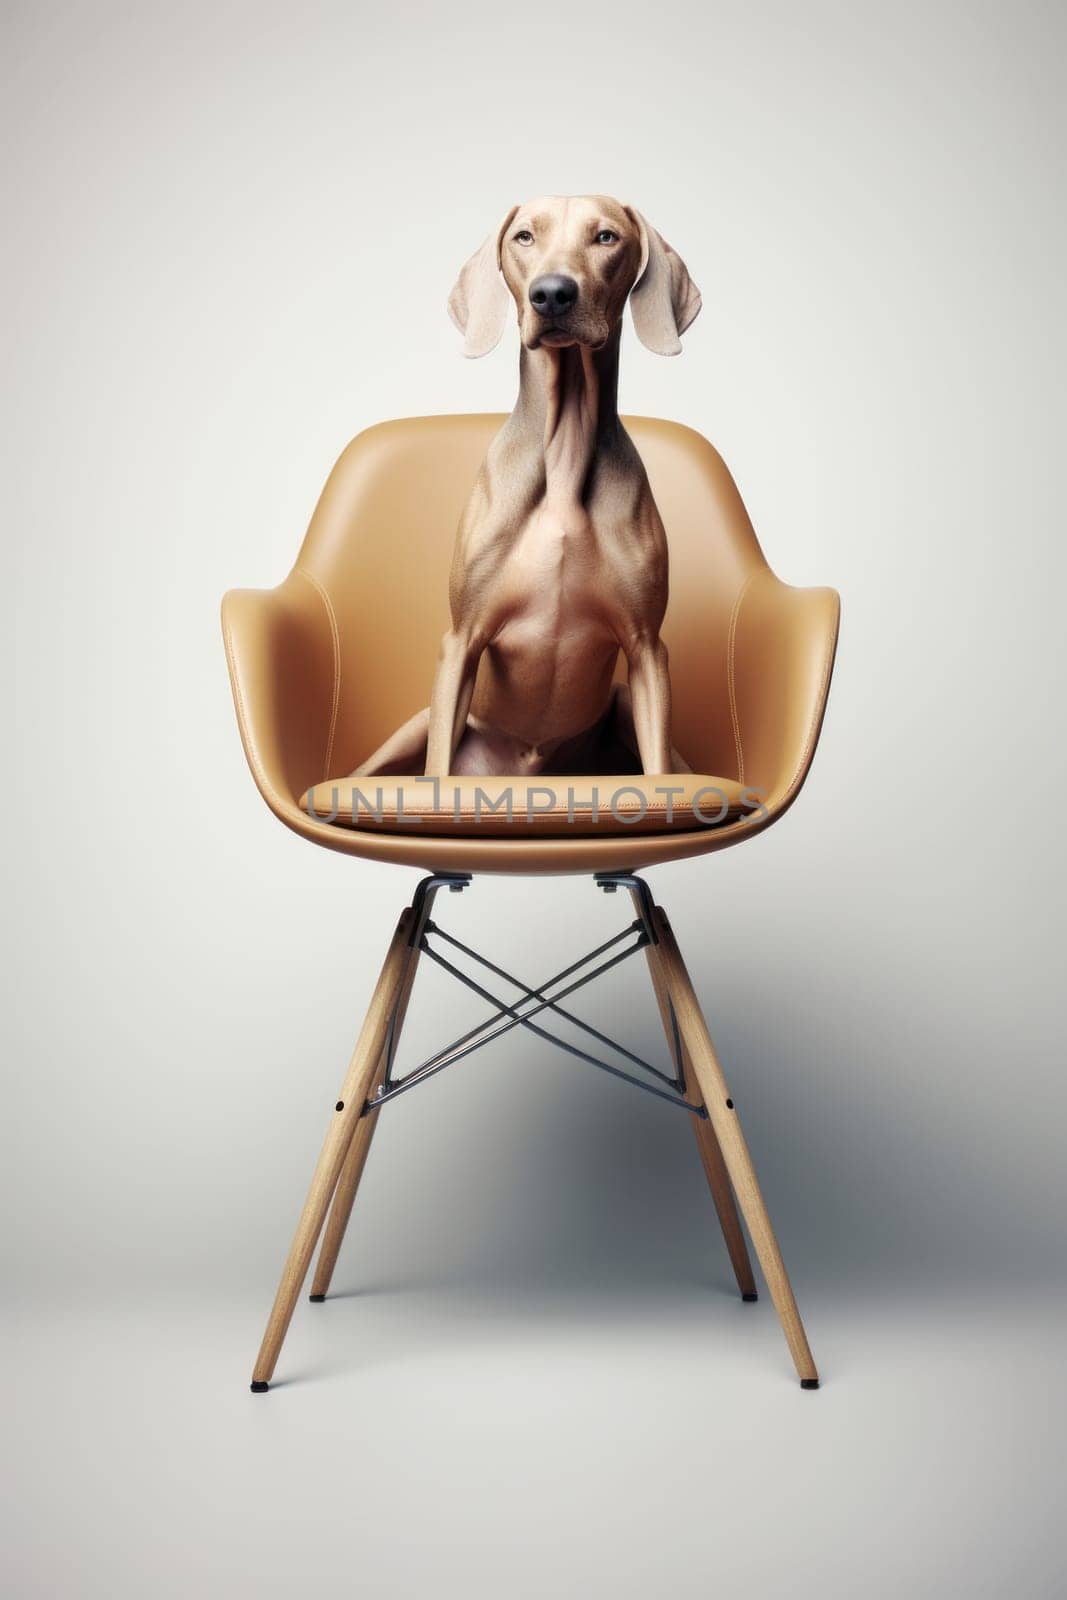 A dog sitting in a chair with a white background, AI by starush